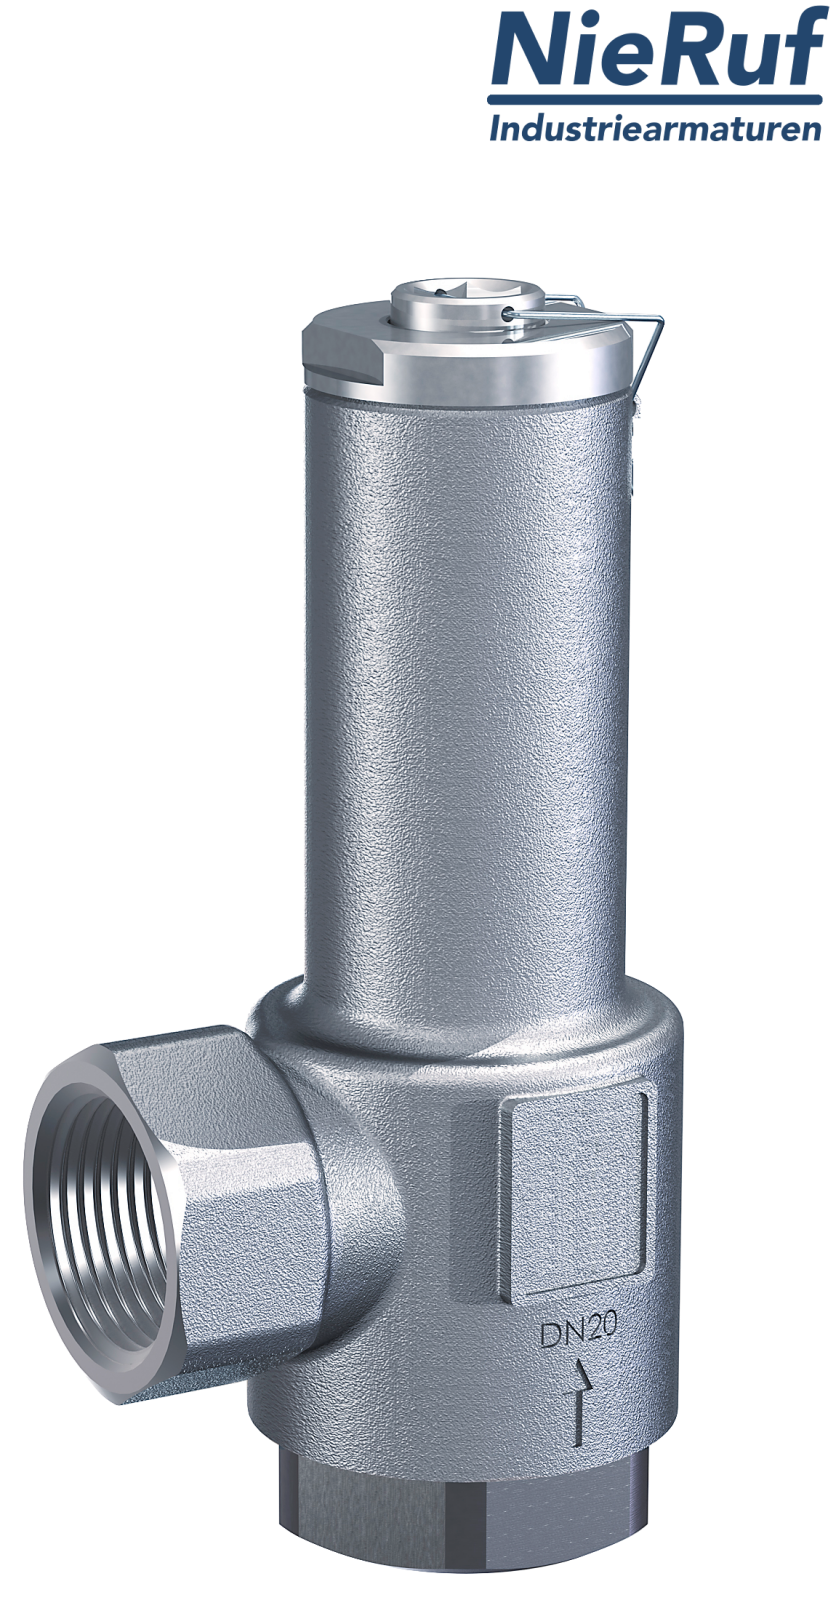 angle-type overflow valve 3/8" inch fm UV04 stainless steel AISI 316L 0,5 - 2,5 bar